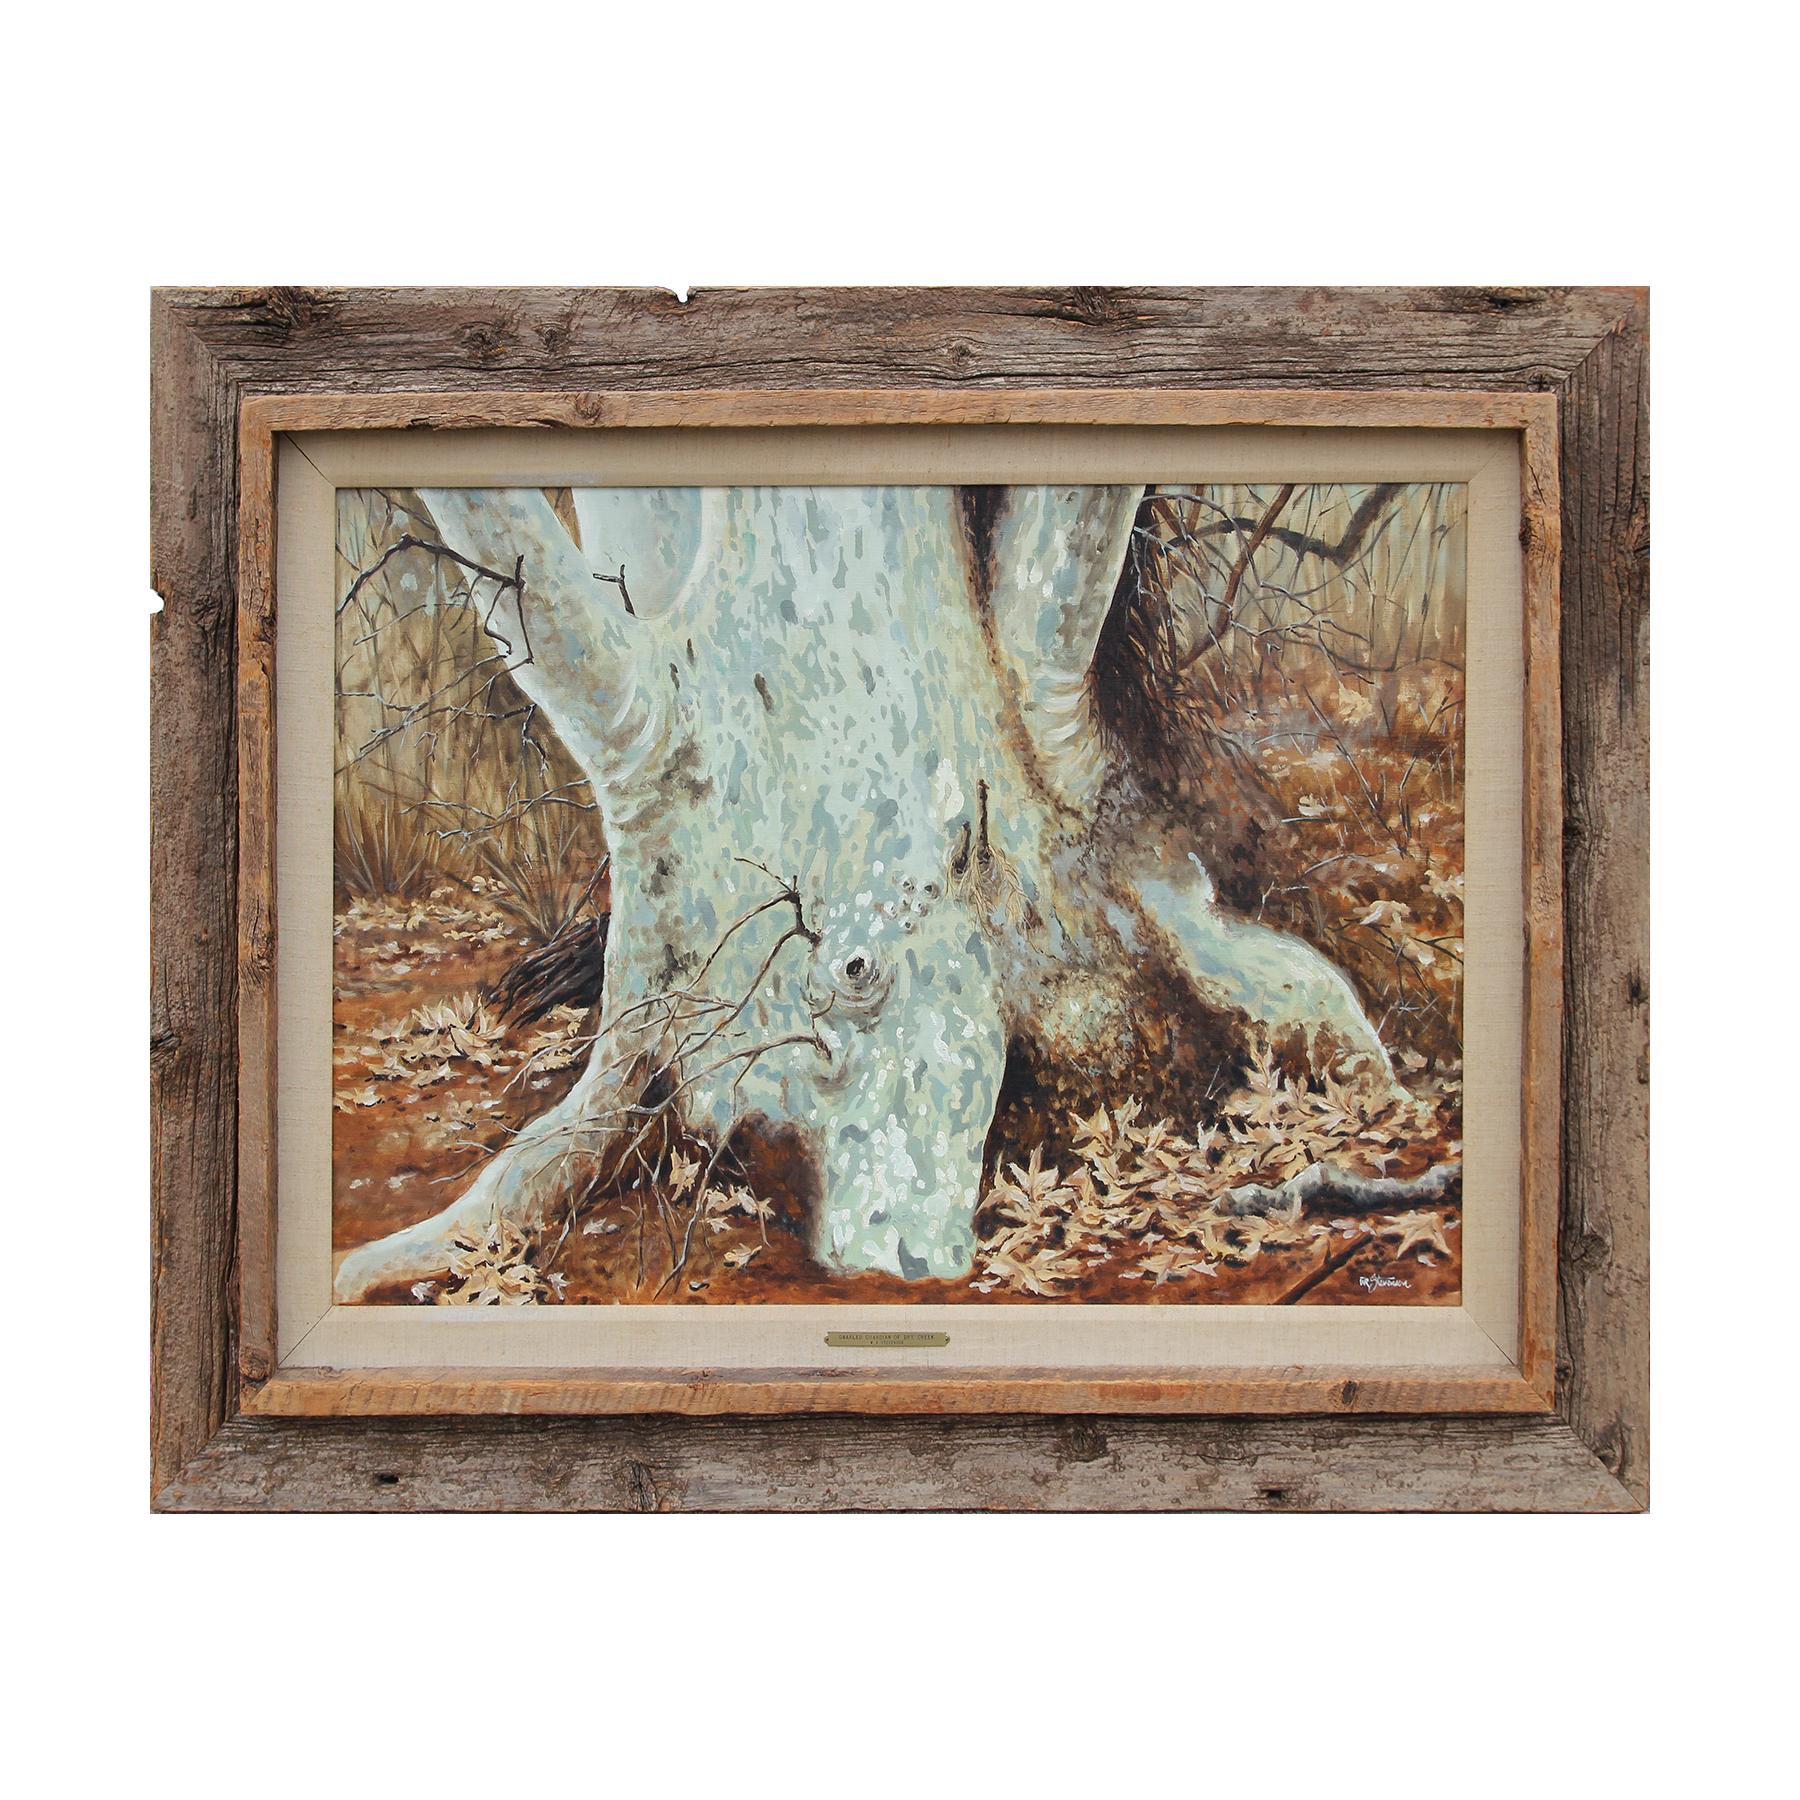 W. R. Stevenson Landscape Painting - "Gnarled Guardian of Dry Creek" Naturalistic Forest Tree Stump Painting